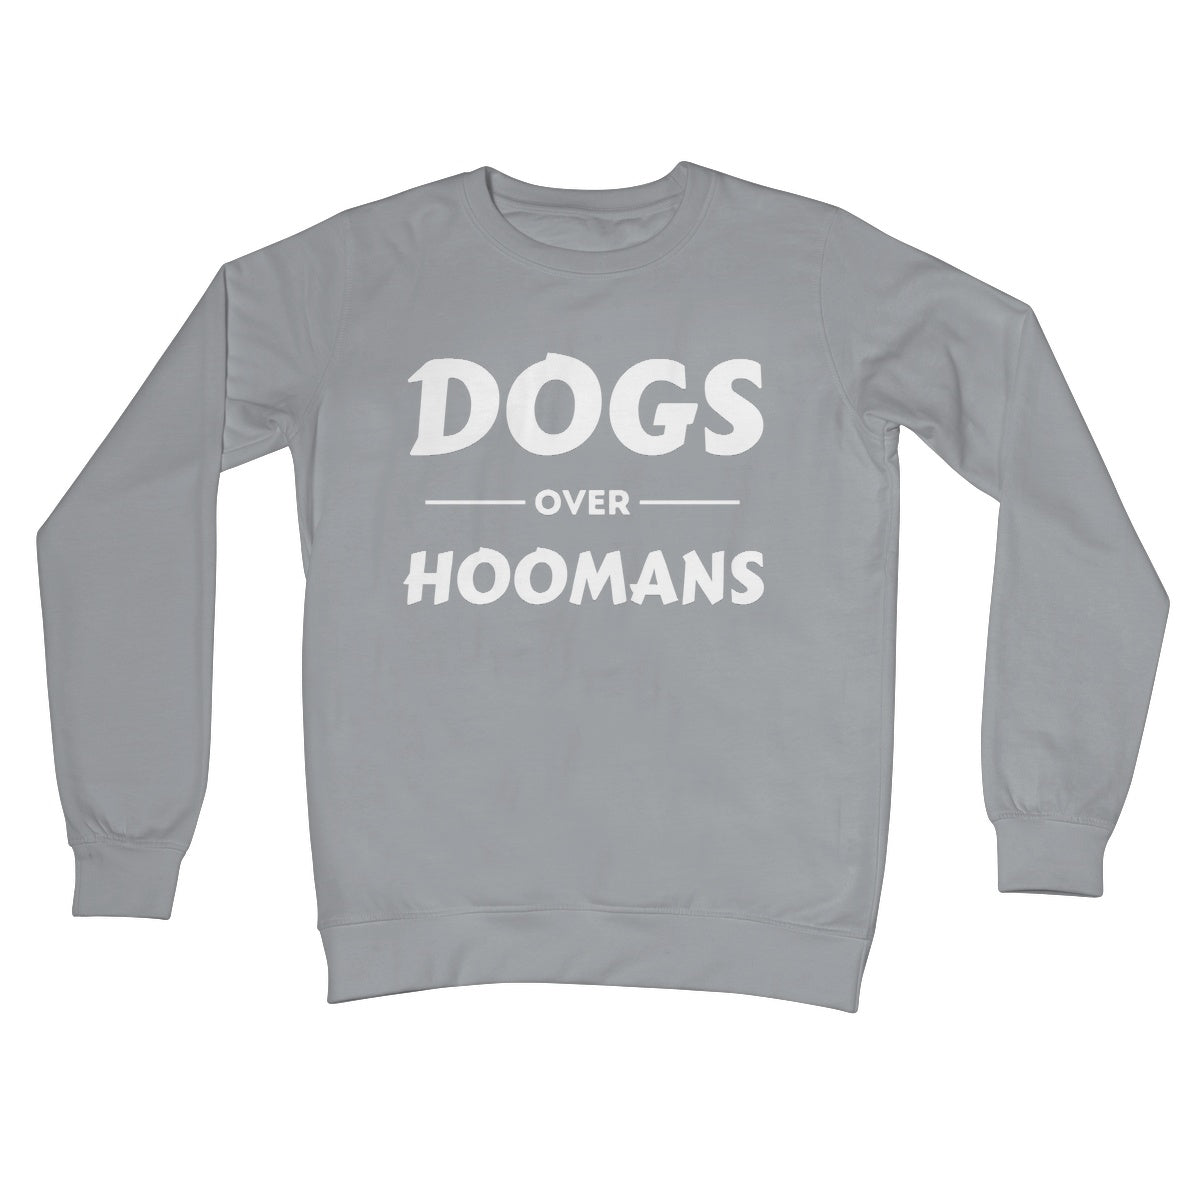 dogs over hoomans jumper grey